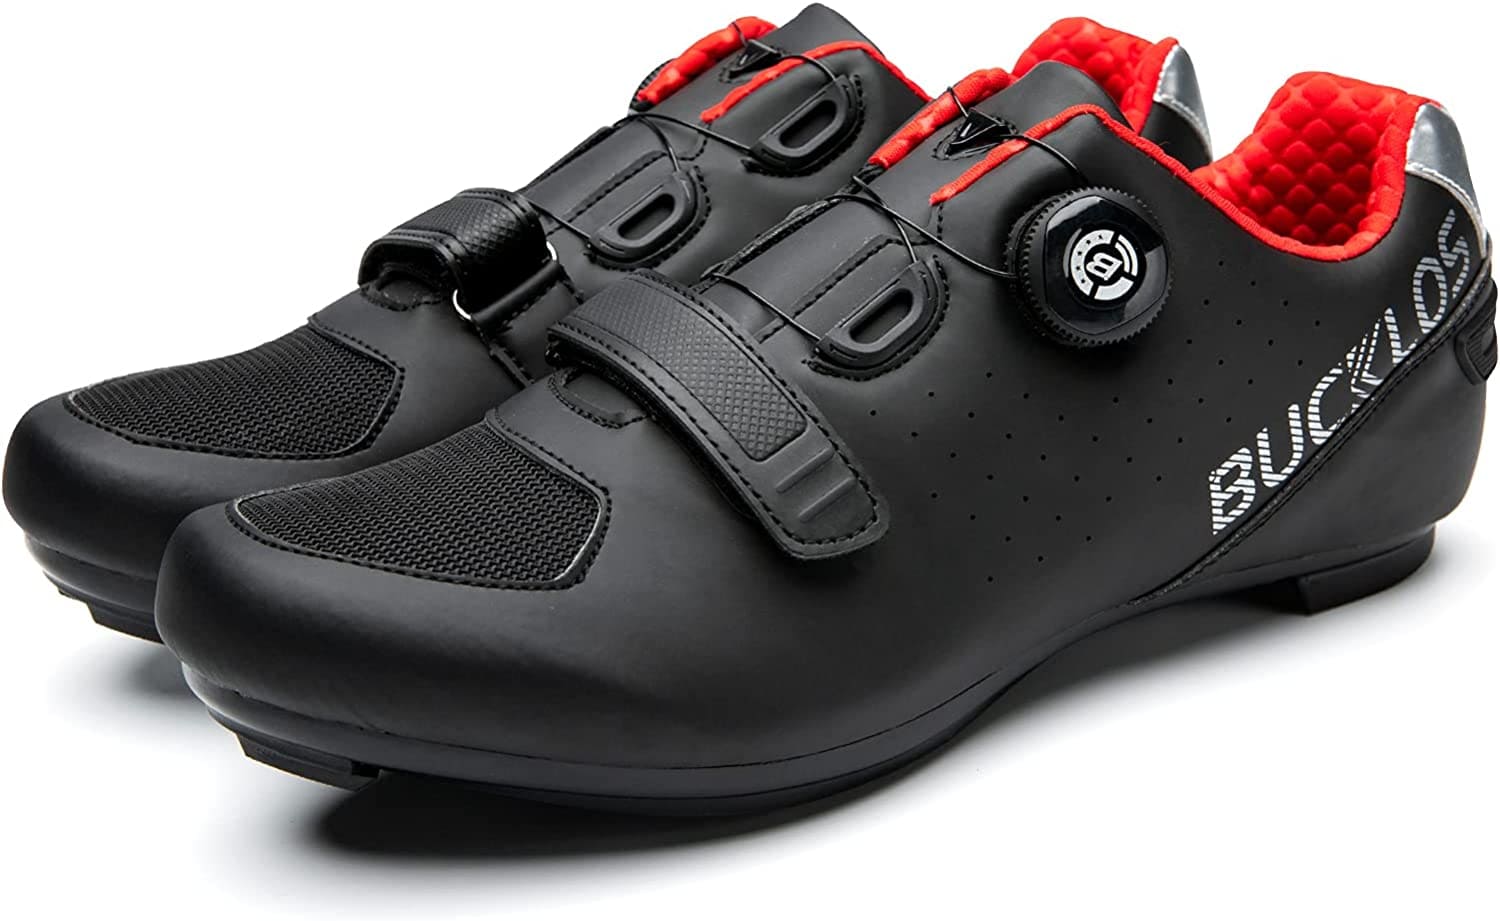 BUCKLOS cycling shoes with Cleats